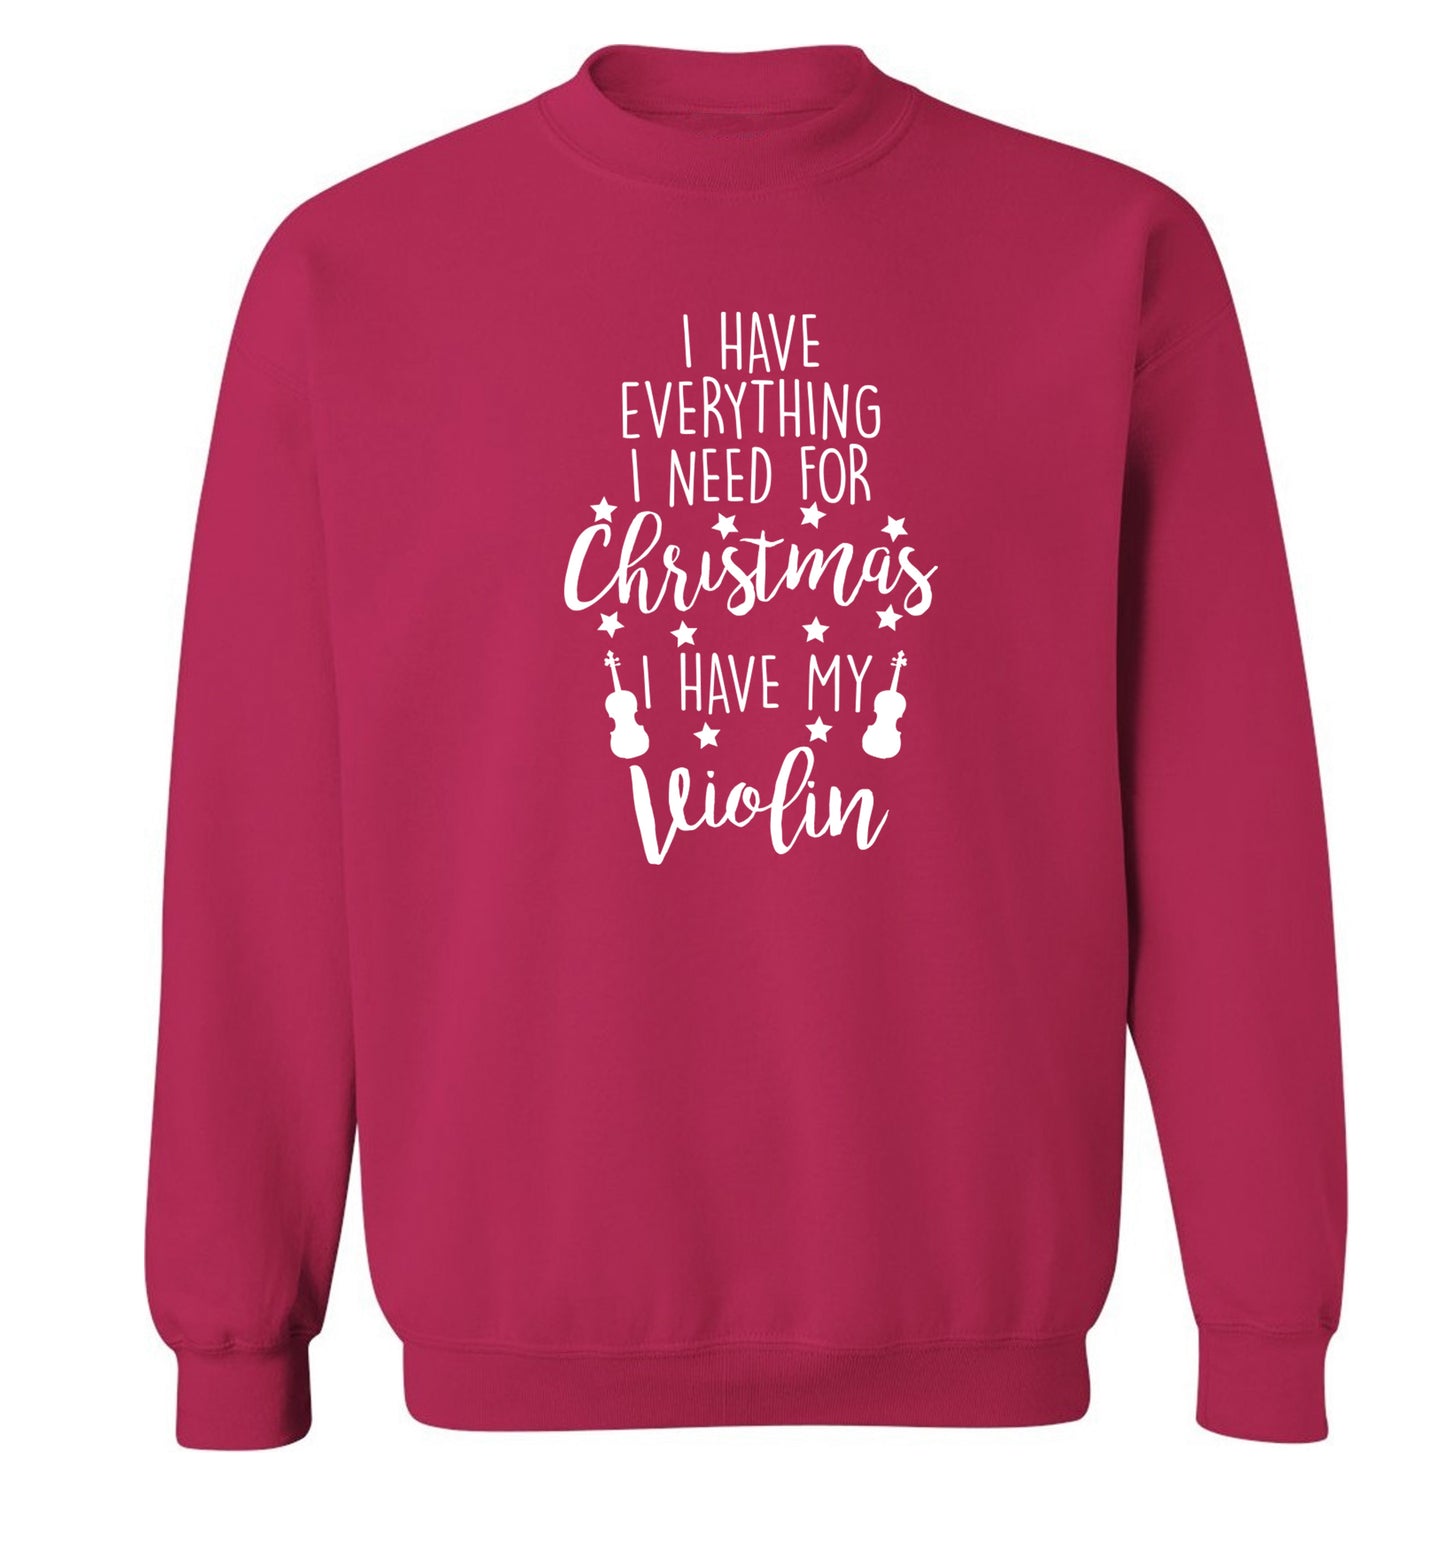 I have everything I need for Christmas I have my violin Adult's unisex pink Sweater 2XL